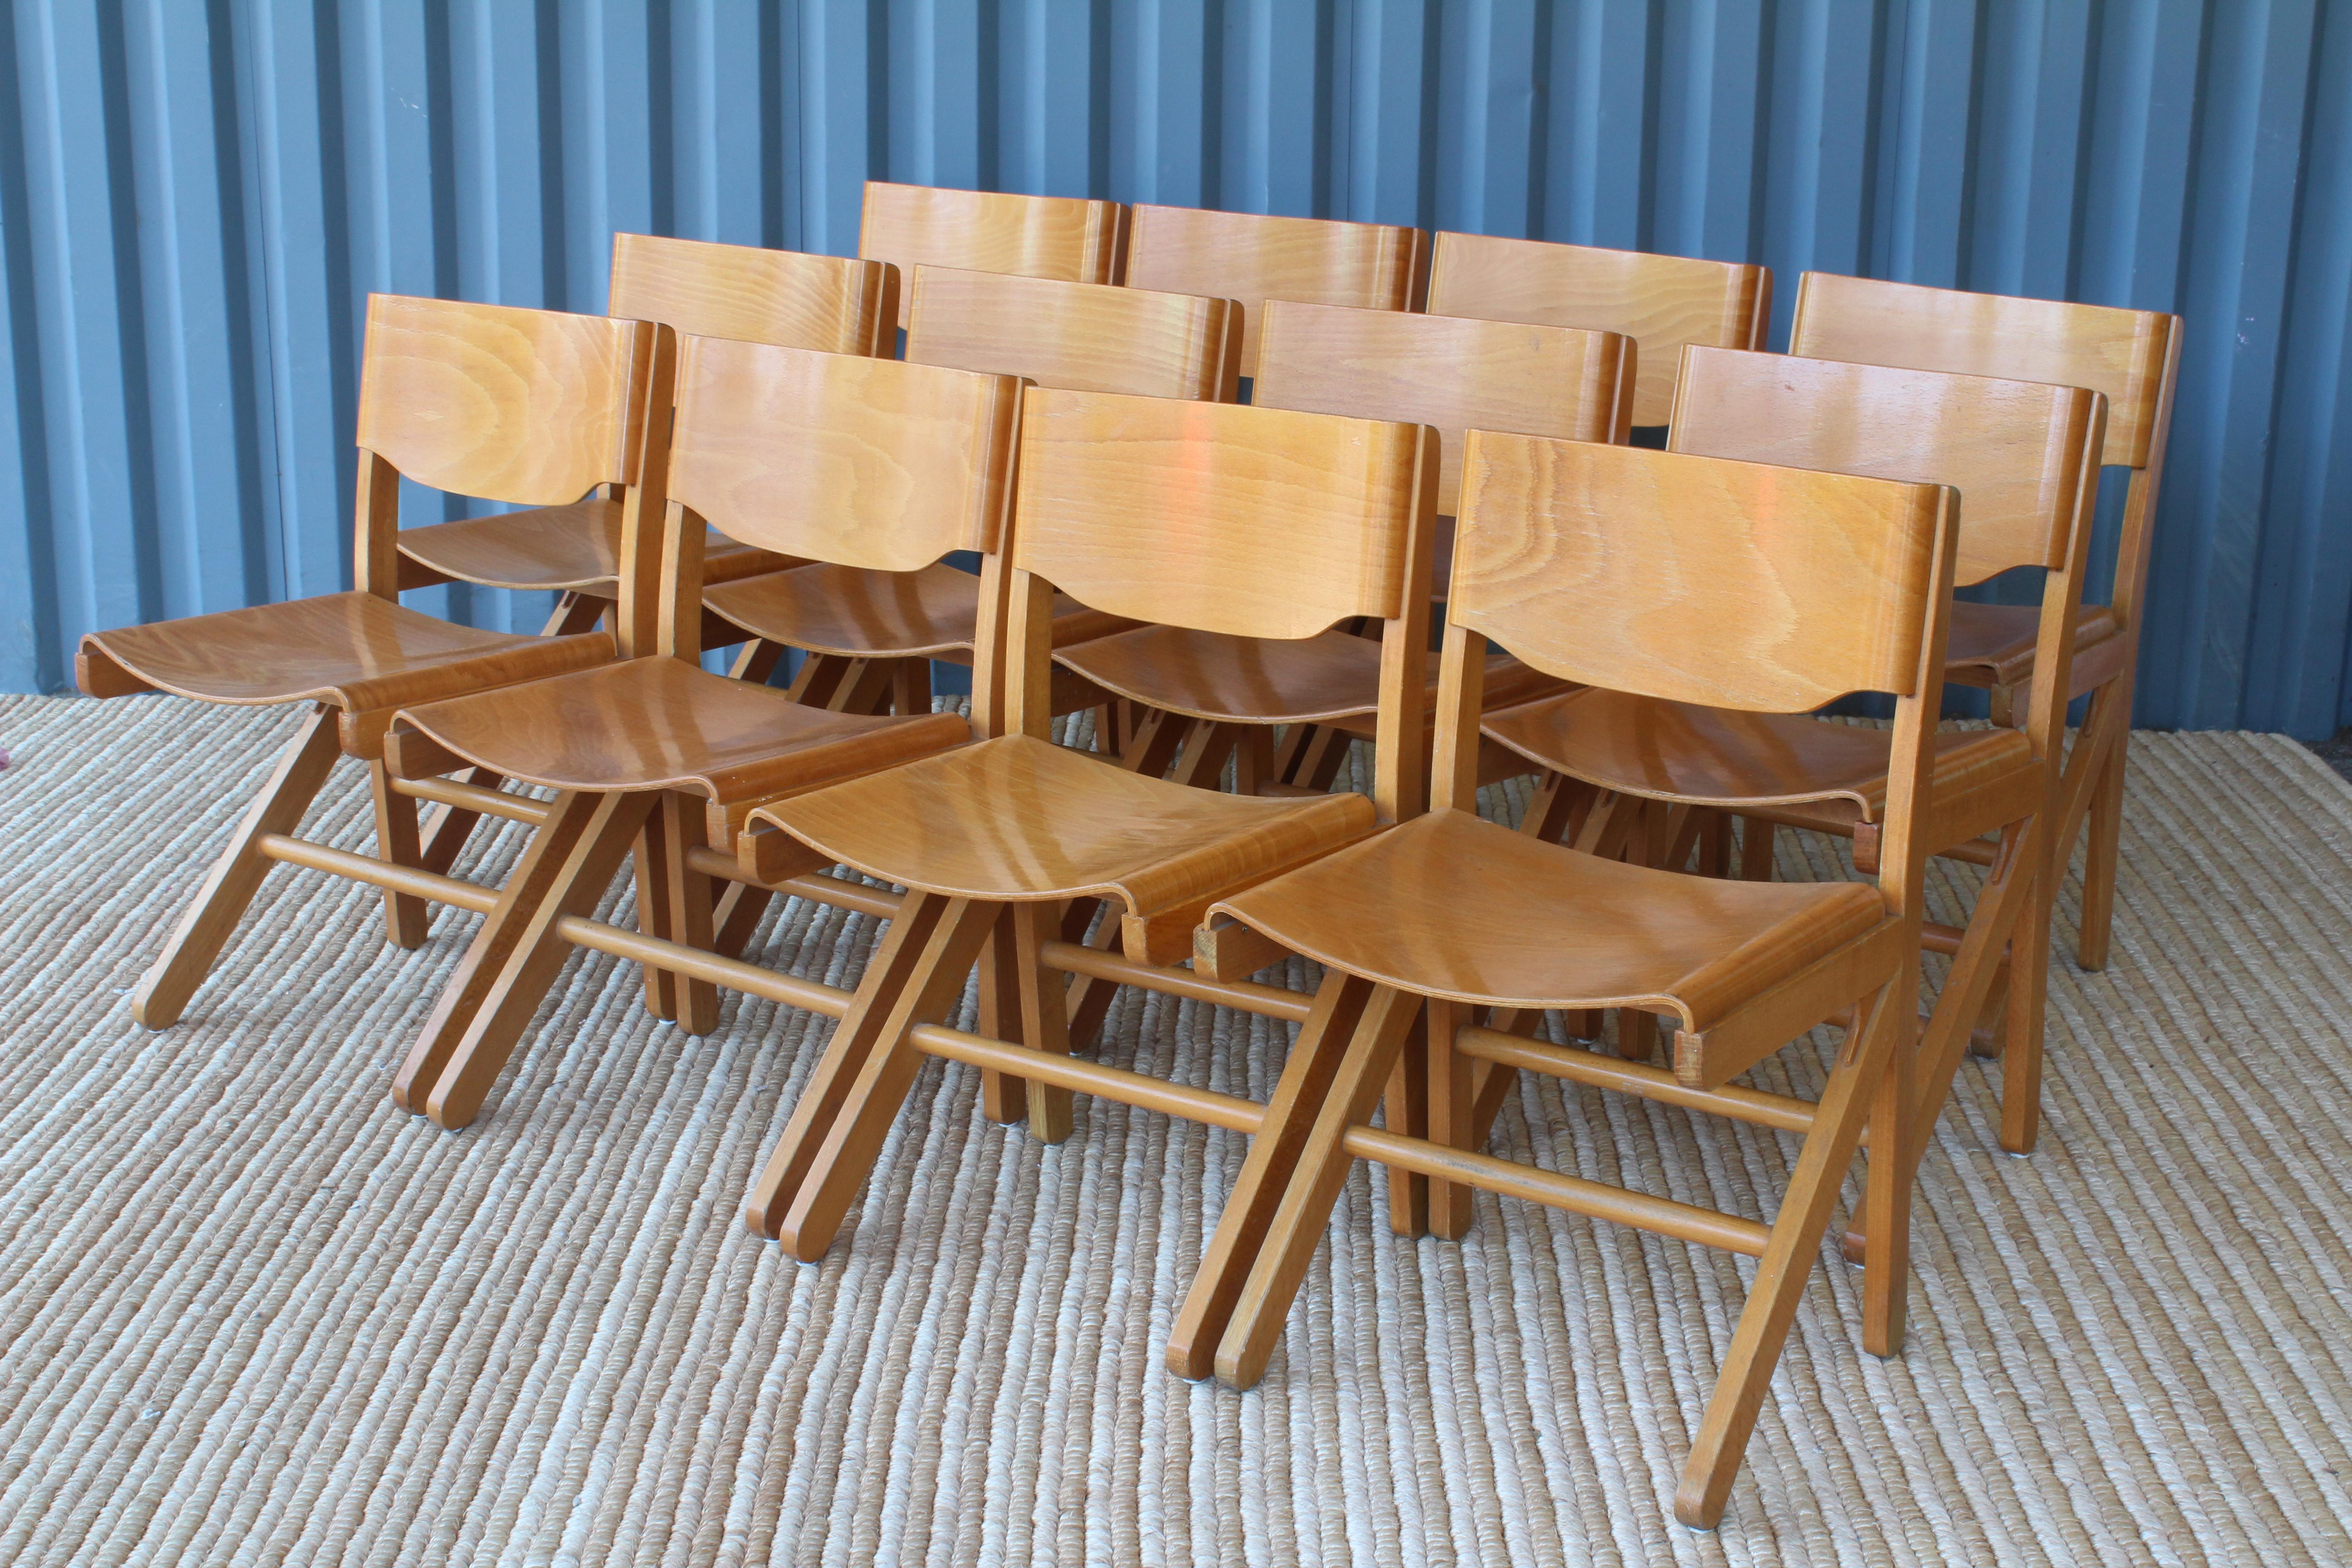 Set of 11 bentwood maple dining chairs by Joamin Baumann. Made in France, circa 1950s. Stamped 'Baumann' under each chair.
Sold individually.
  